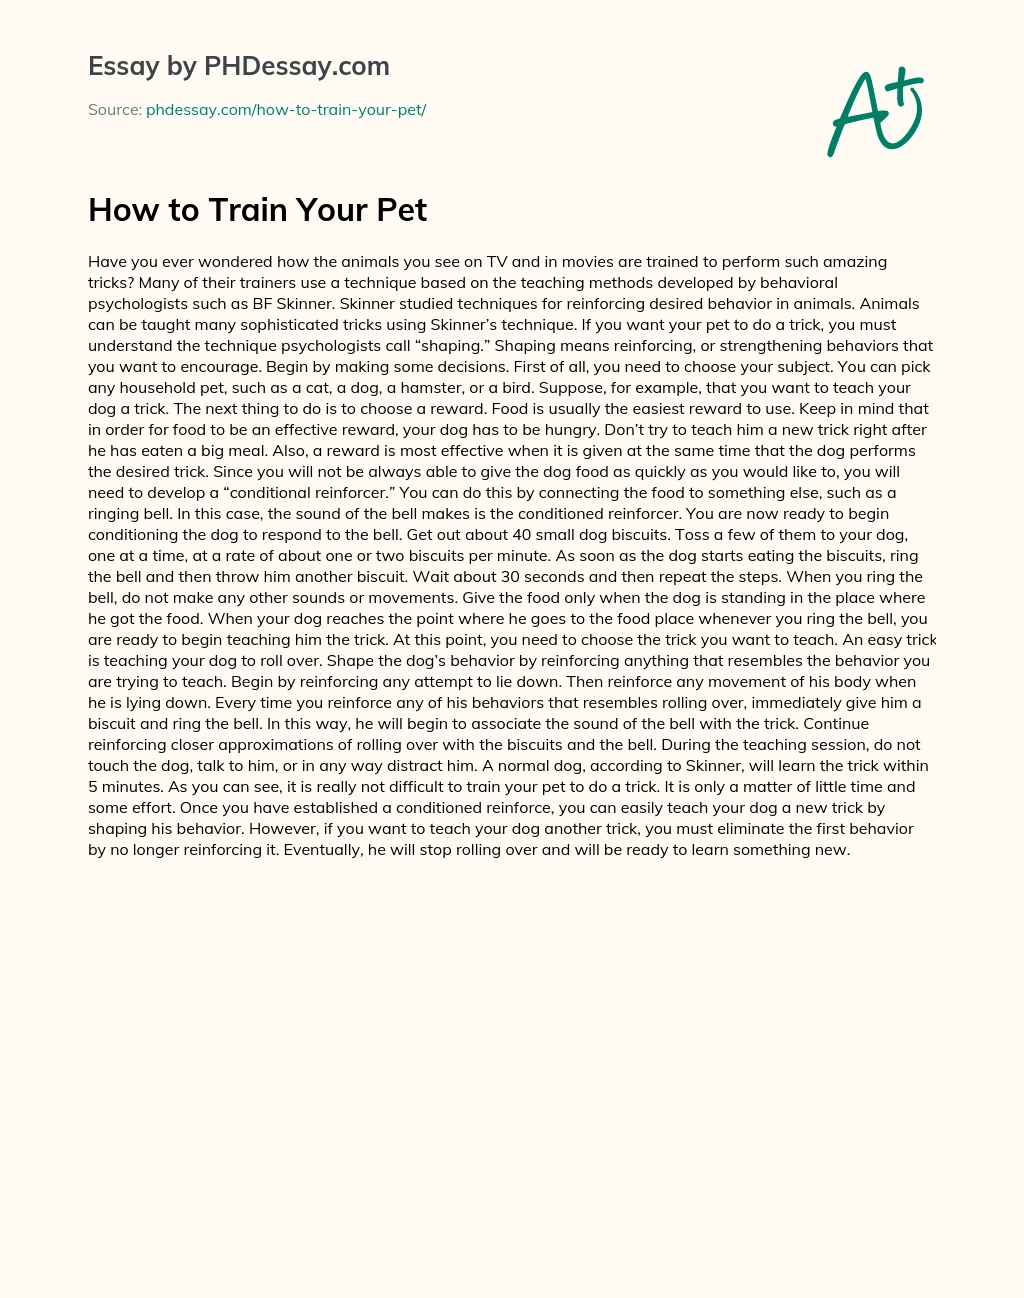 How to Train Your Pet essay